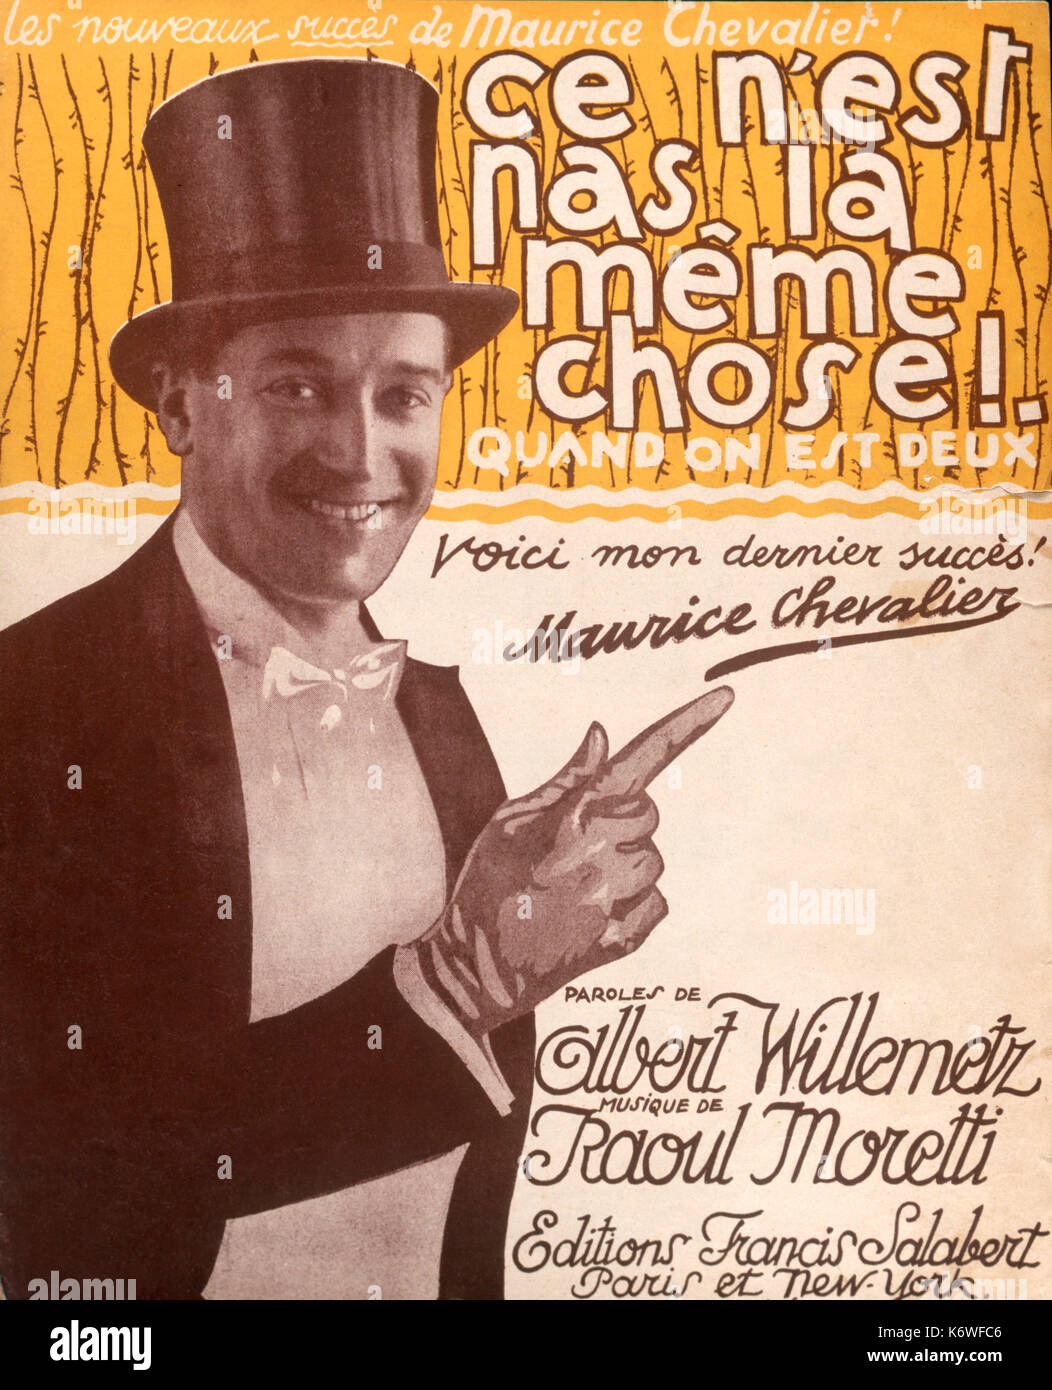 CHEVALIER, Maurice - Ce n'est pas la meme chose Cover of score, with photograph of Chevalier, 1924.  Published by Francis Salabert. French comedian, singer, actor, songwriter, 1888-1972 Stock Photo